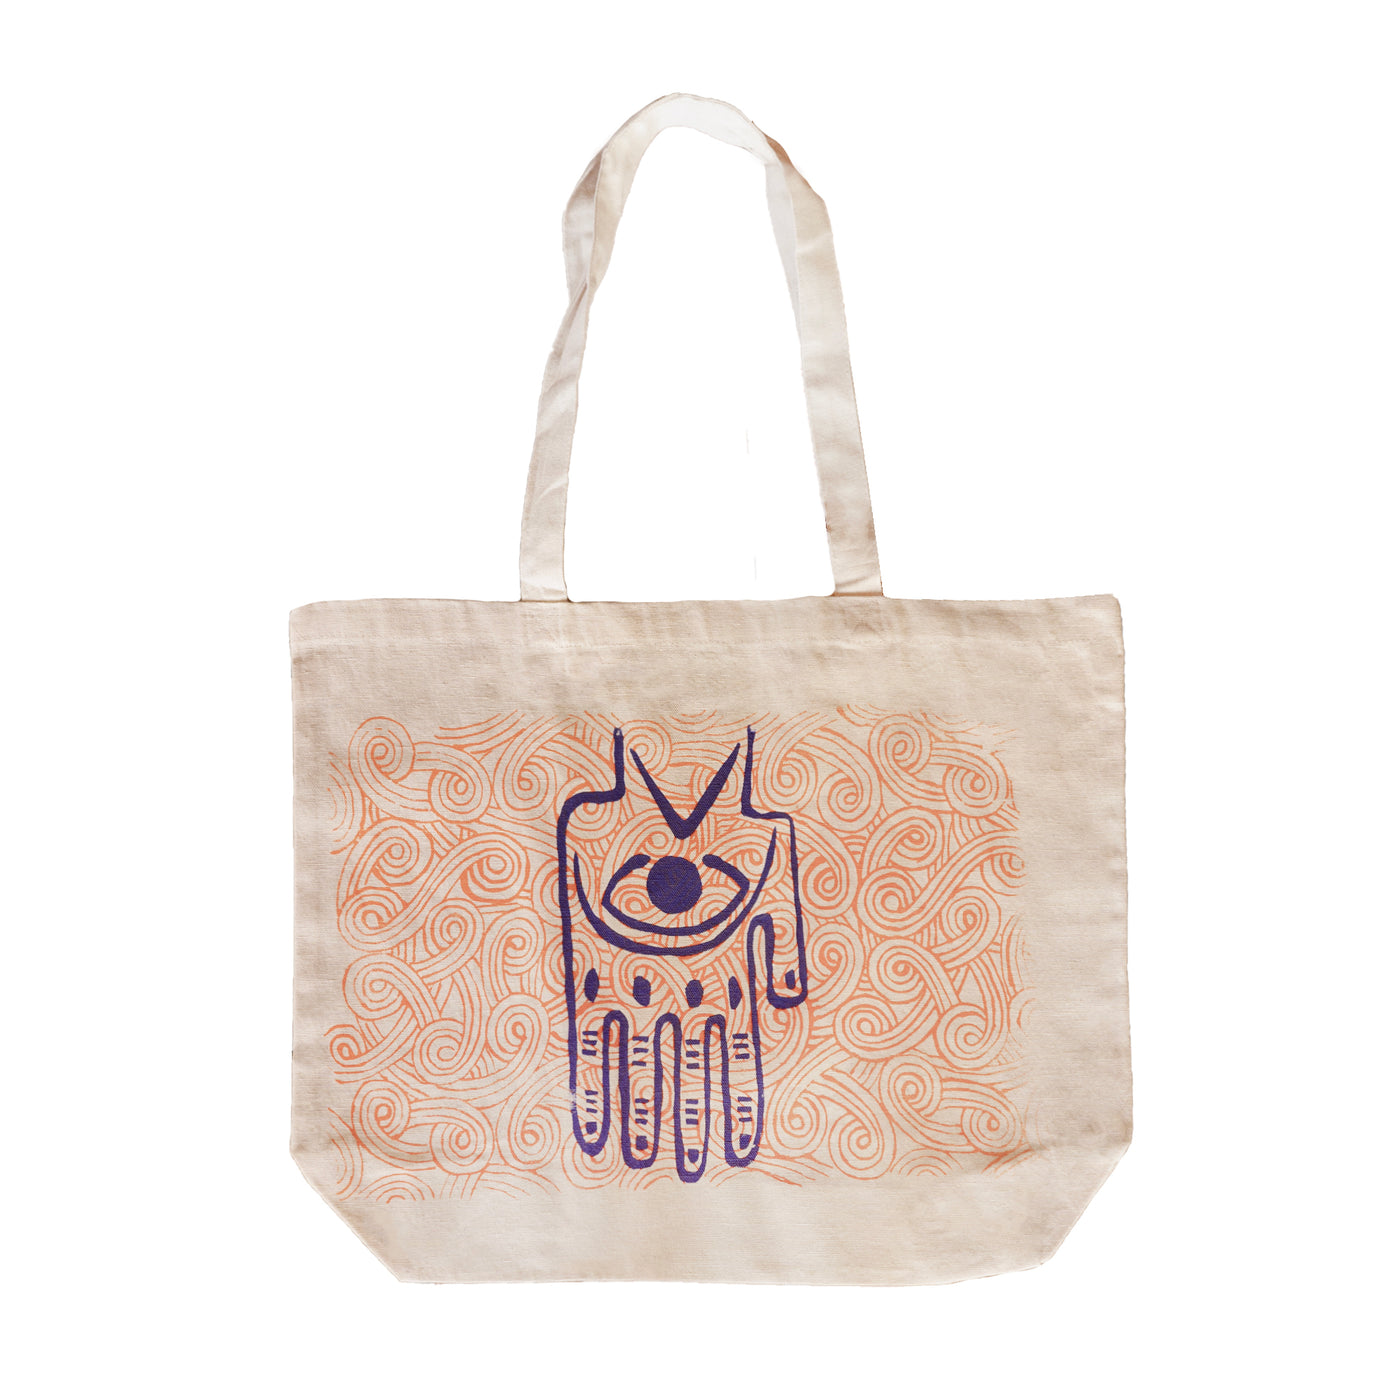 Tote by Jimmy D. Horn printed with his artwork